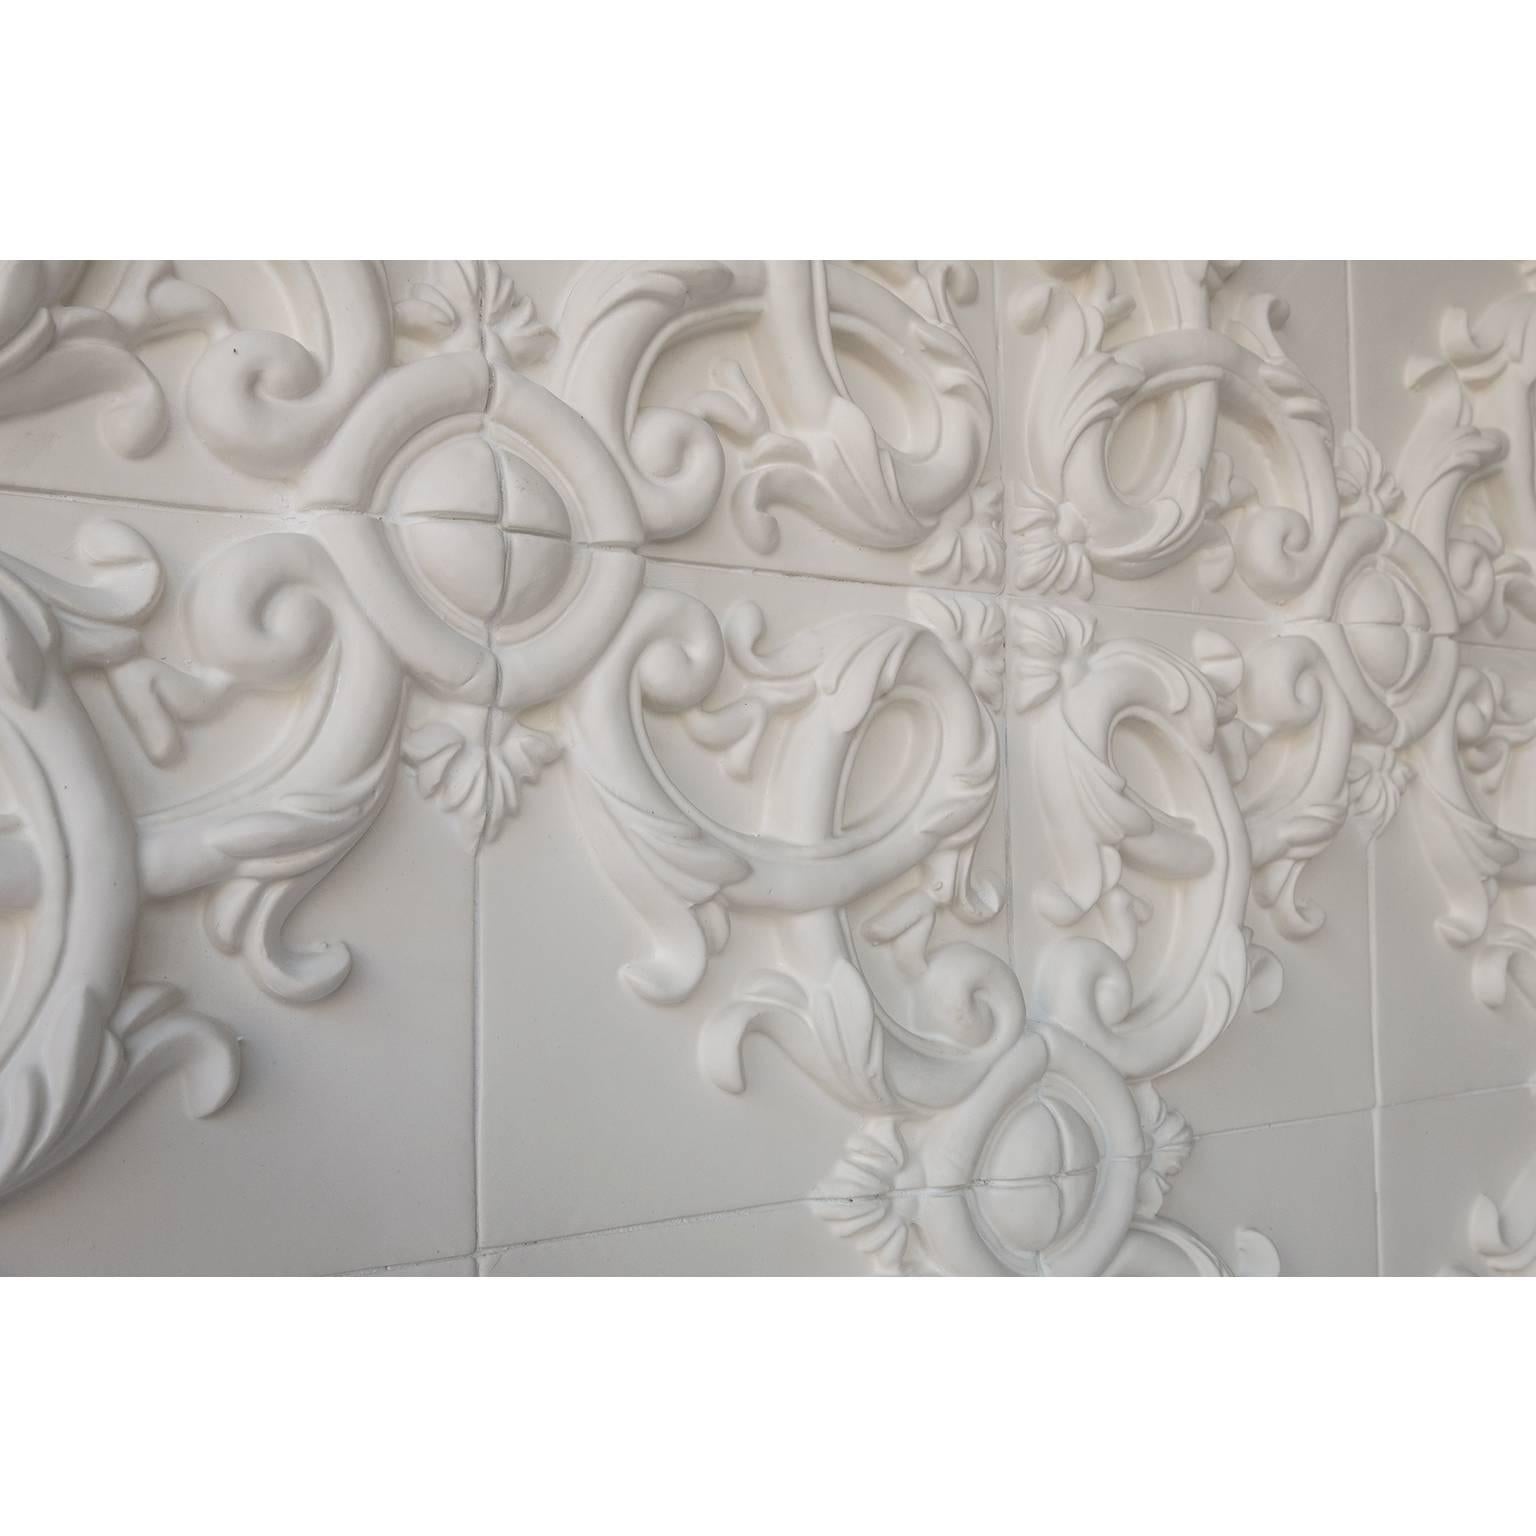 Baroque Revival Decorative Panel in Ceramic, Customizable in Size and Finishes, Acanto For Sale